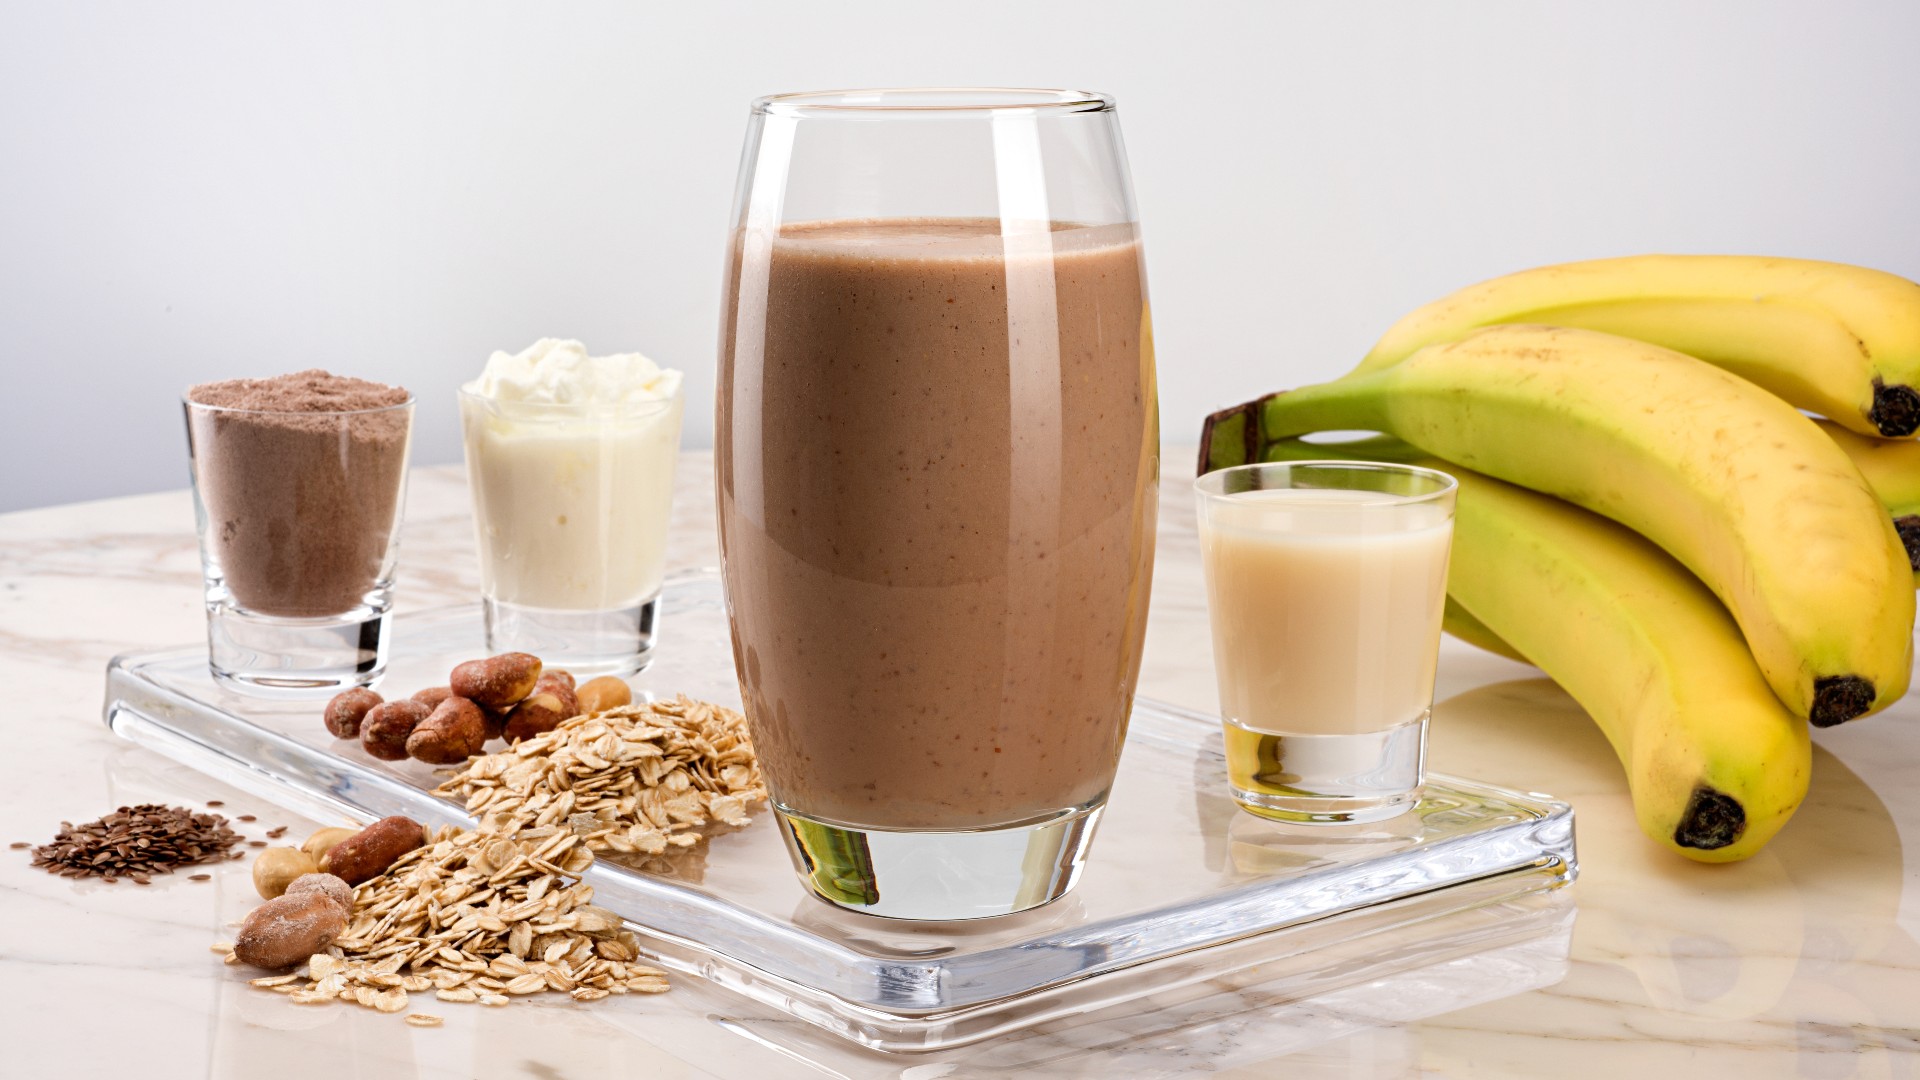 Can Protein Shakes Help You Gain Weight? | Live Science